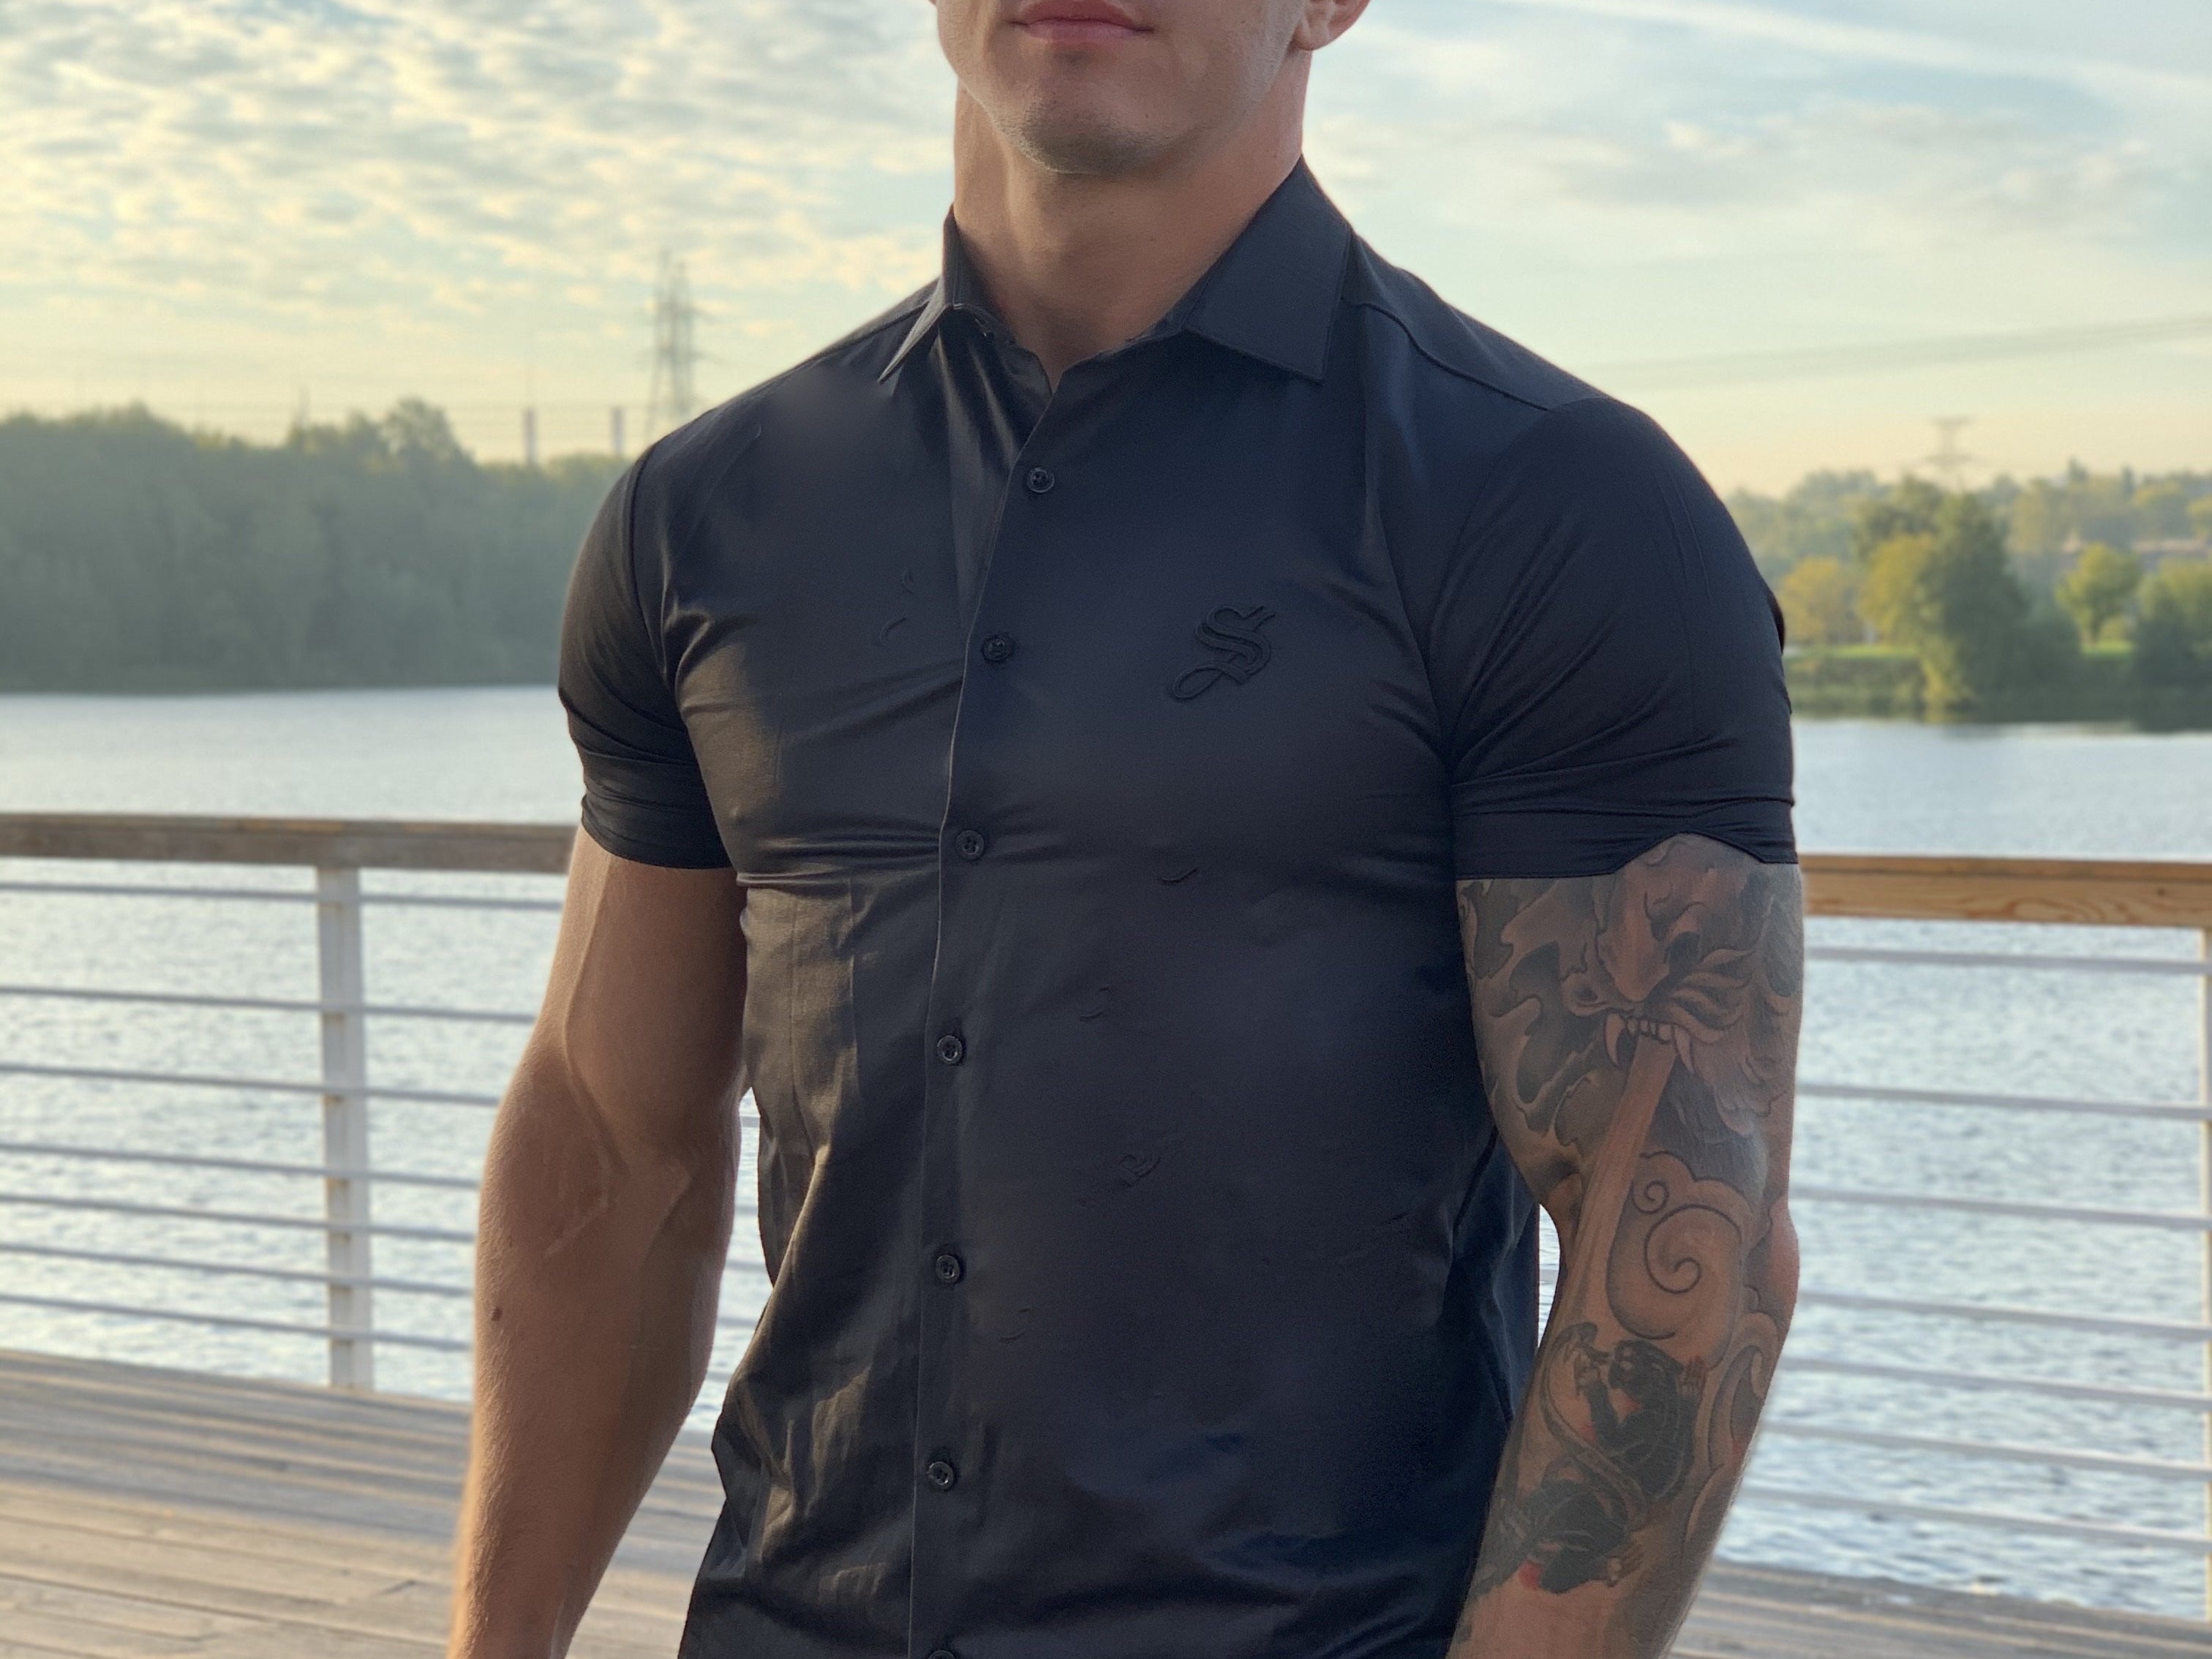 Clean Cut - Black Shirt for Men (PRE-ORDER DISPATCH DATE 25 SEPTEMBER) - Sarman Fashion - Wholesale Clothing Fashion Brand for Men from Canada